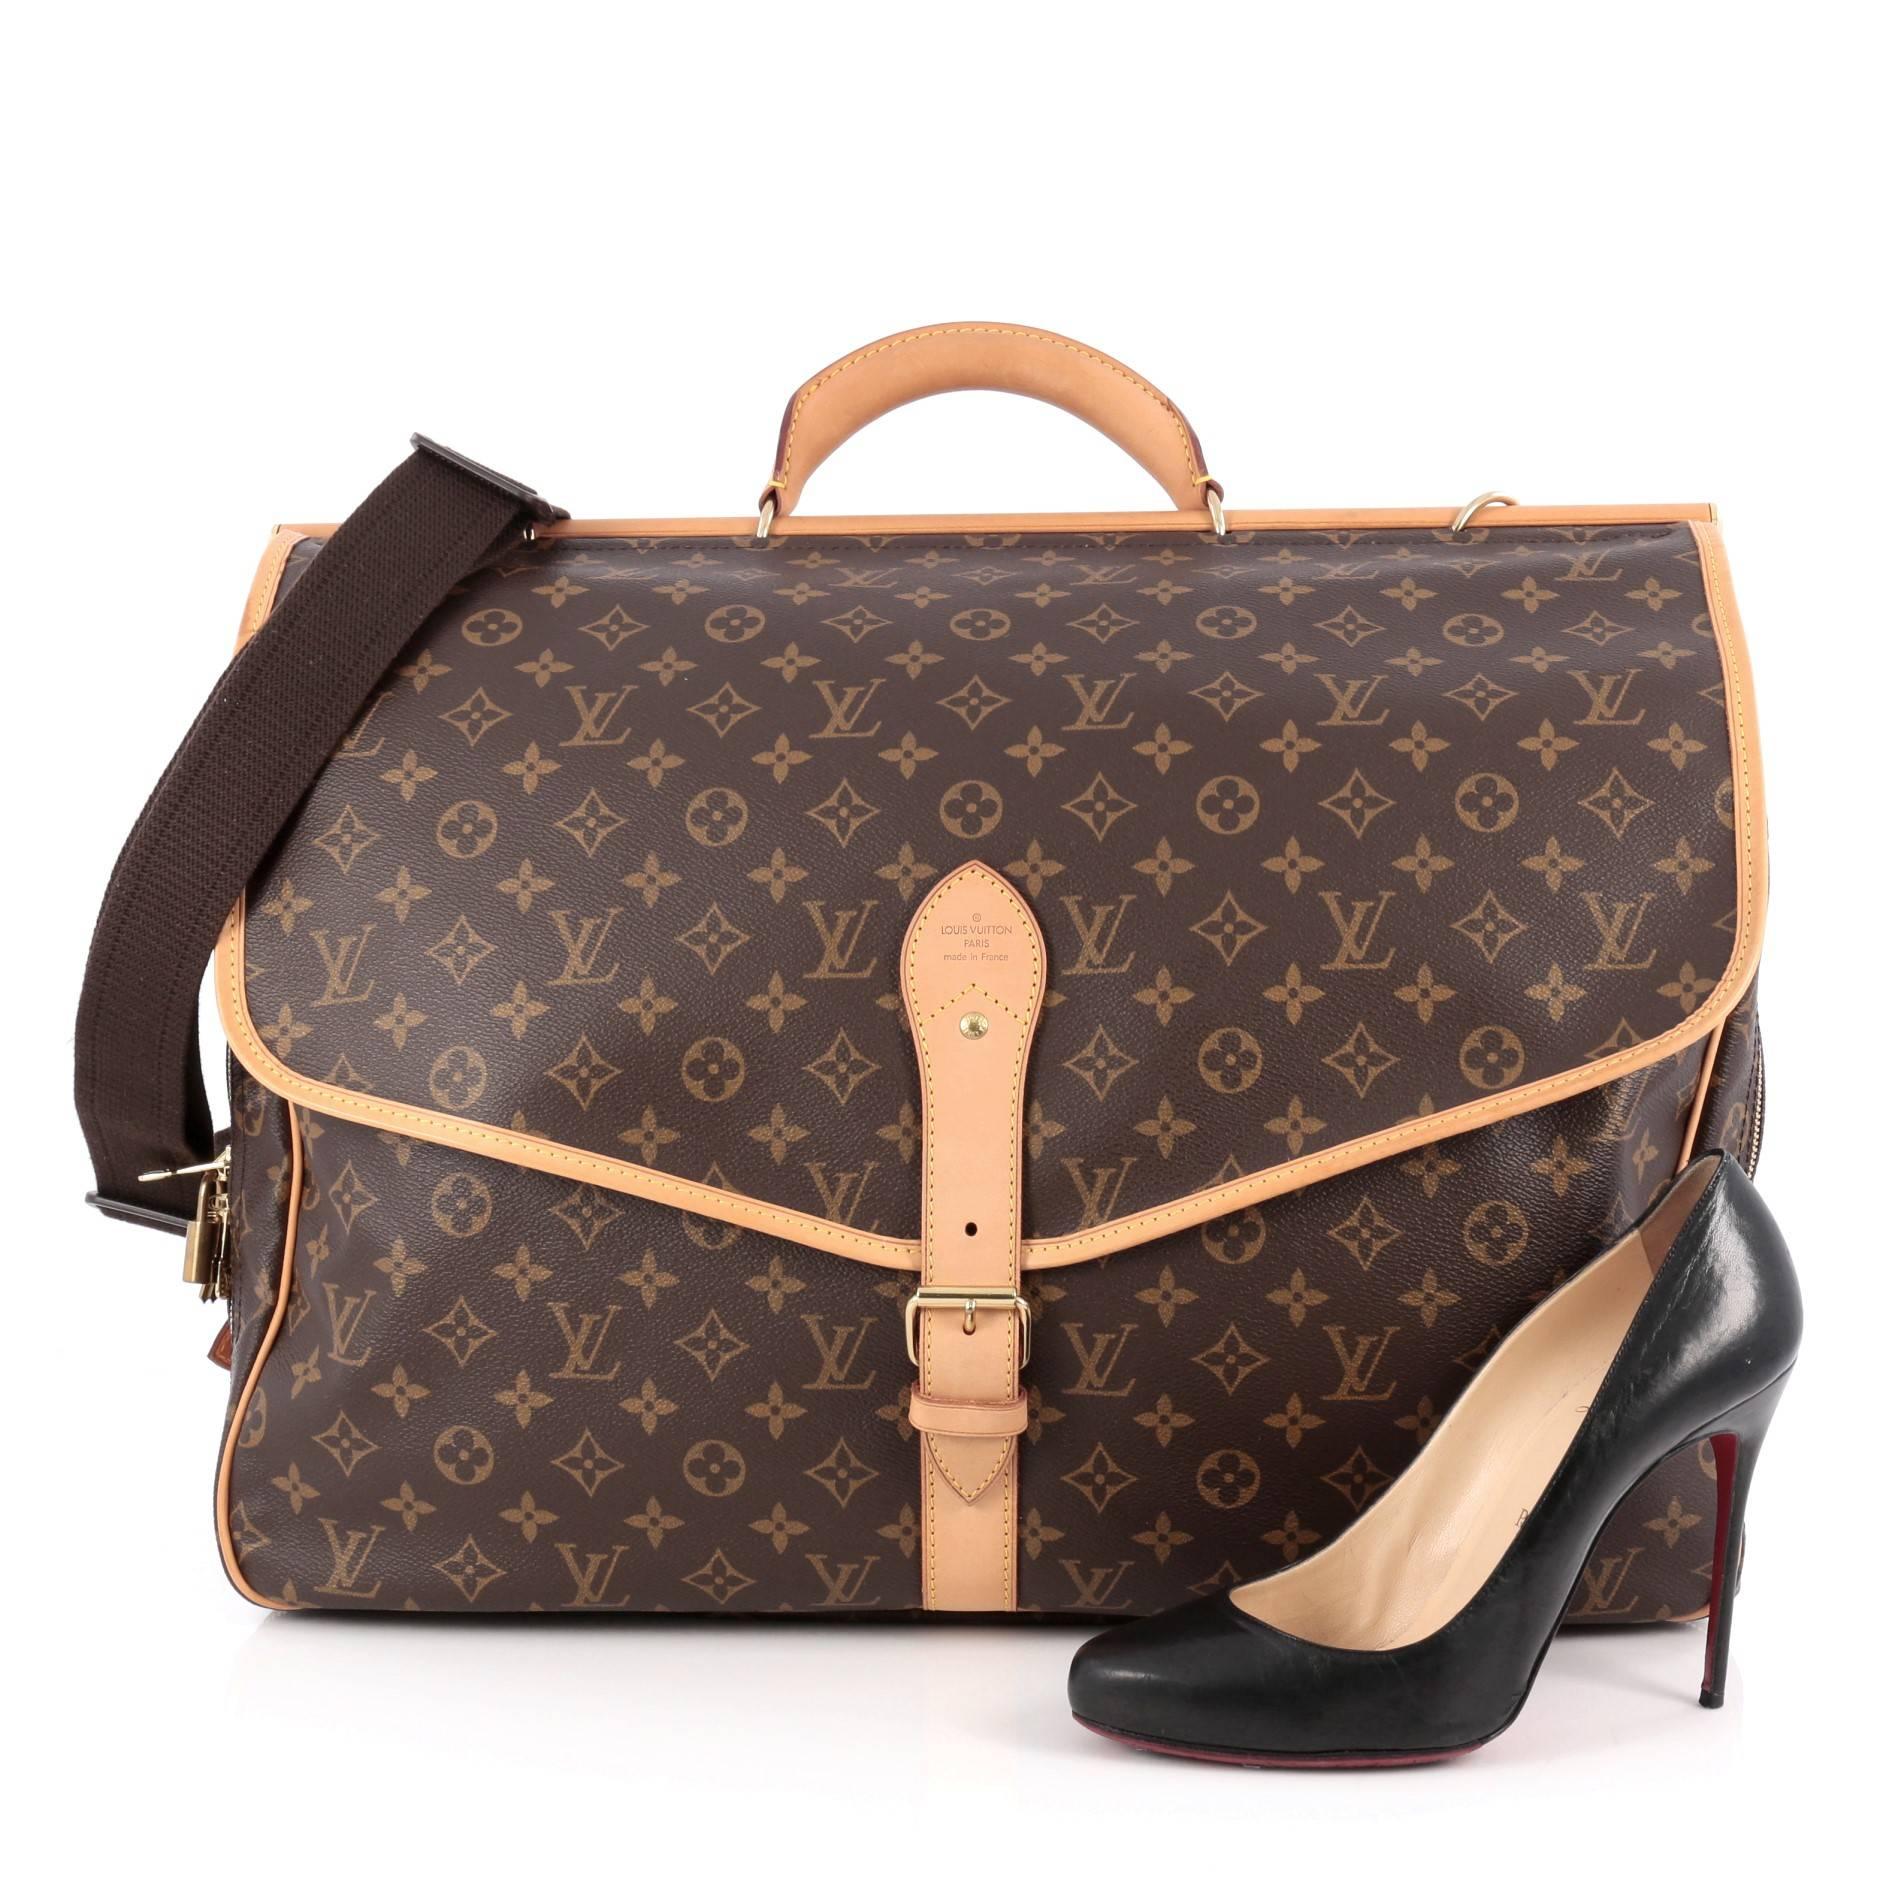 This authentic Louis Vuitton Sac Chasse Hunting Bag Monogram Canvas is a must-have for any avid LV collector. Crafted from brown monogram coated canvas with vachetta leather trims, this luxurious and functional bag features rolled leather top handle